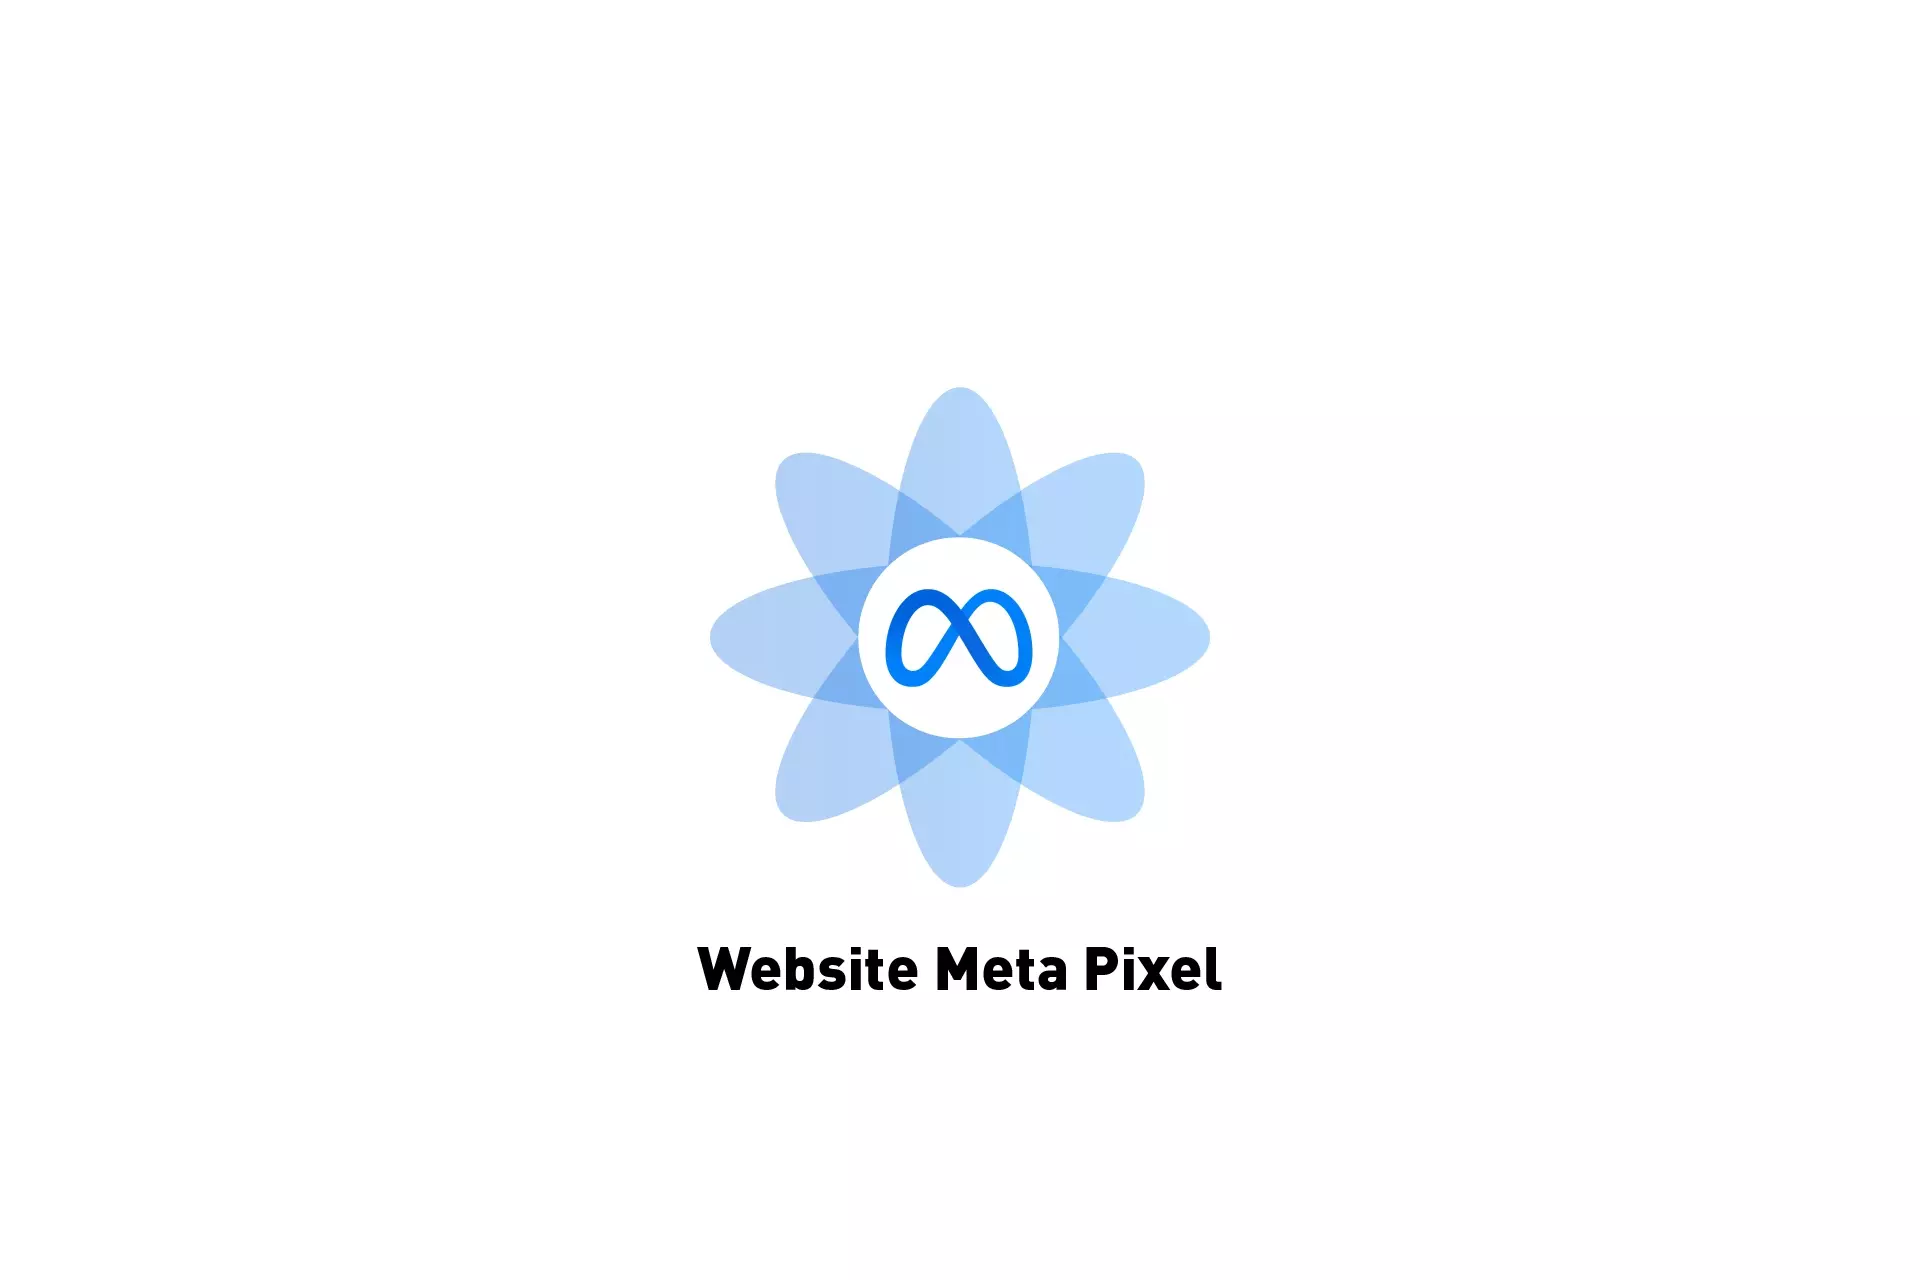 A flower that represents Meta with the text "Website Meta Pixel" beneath it.